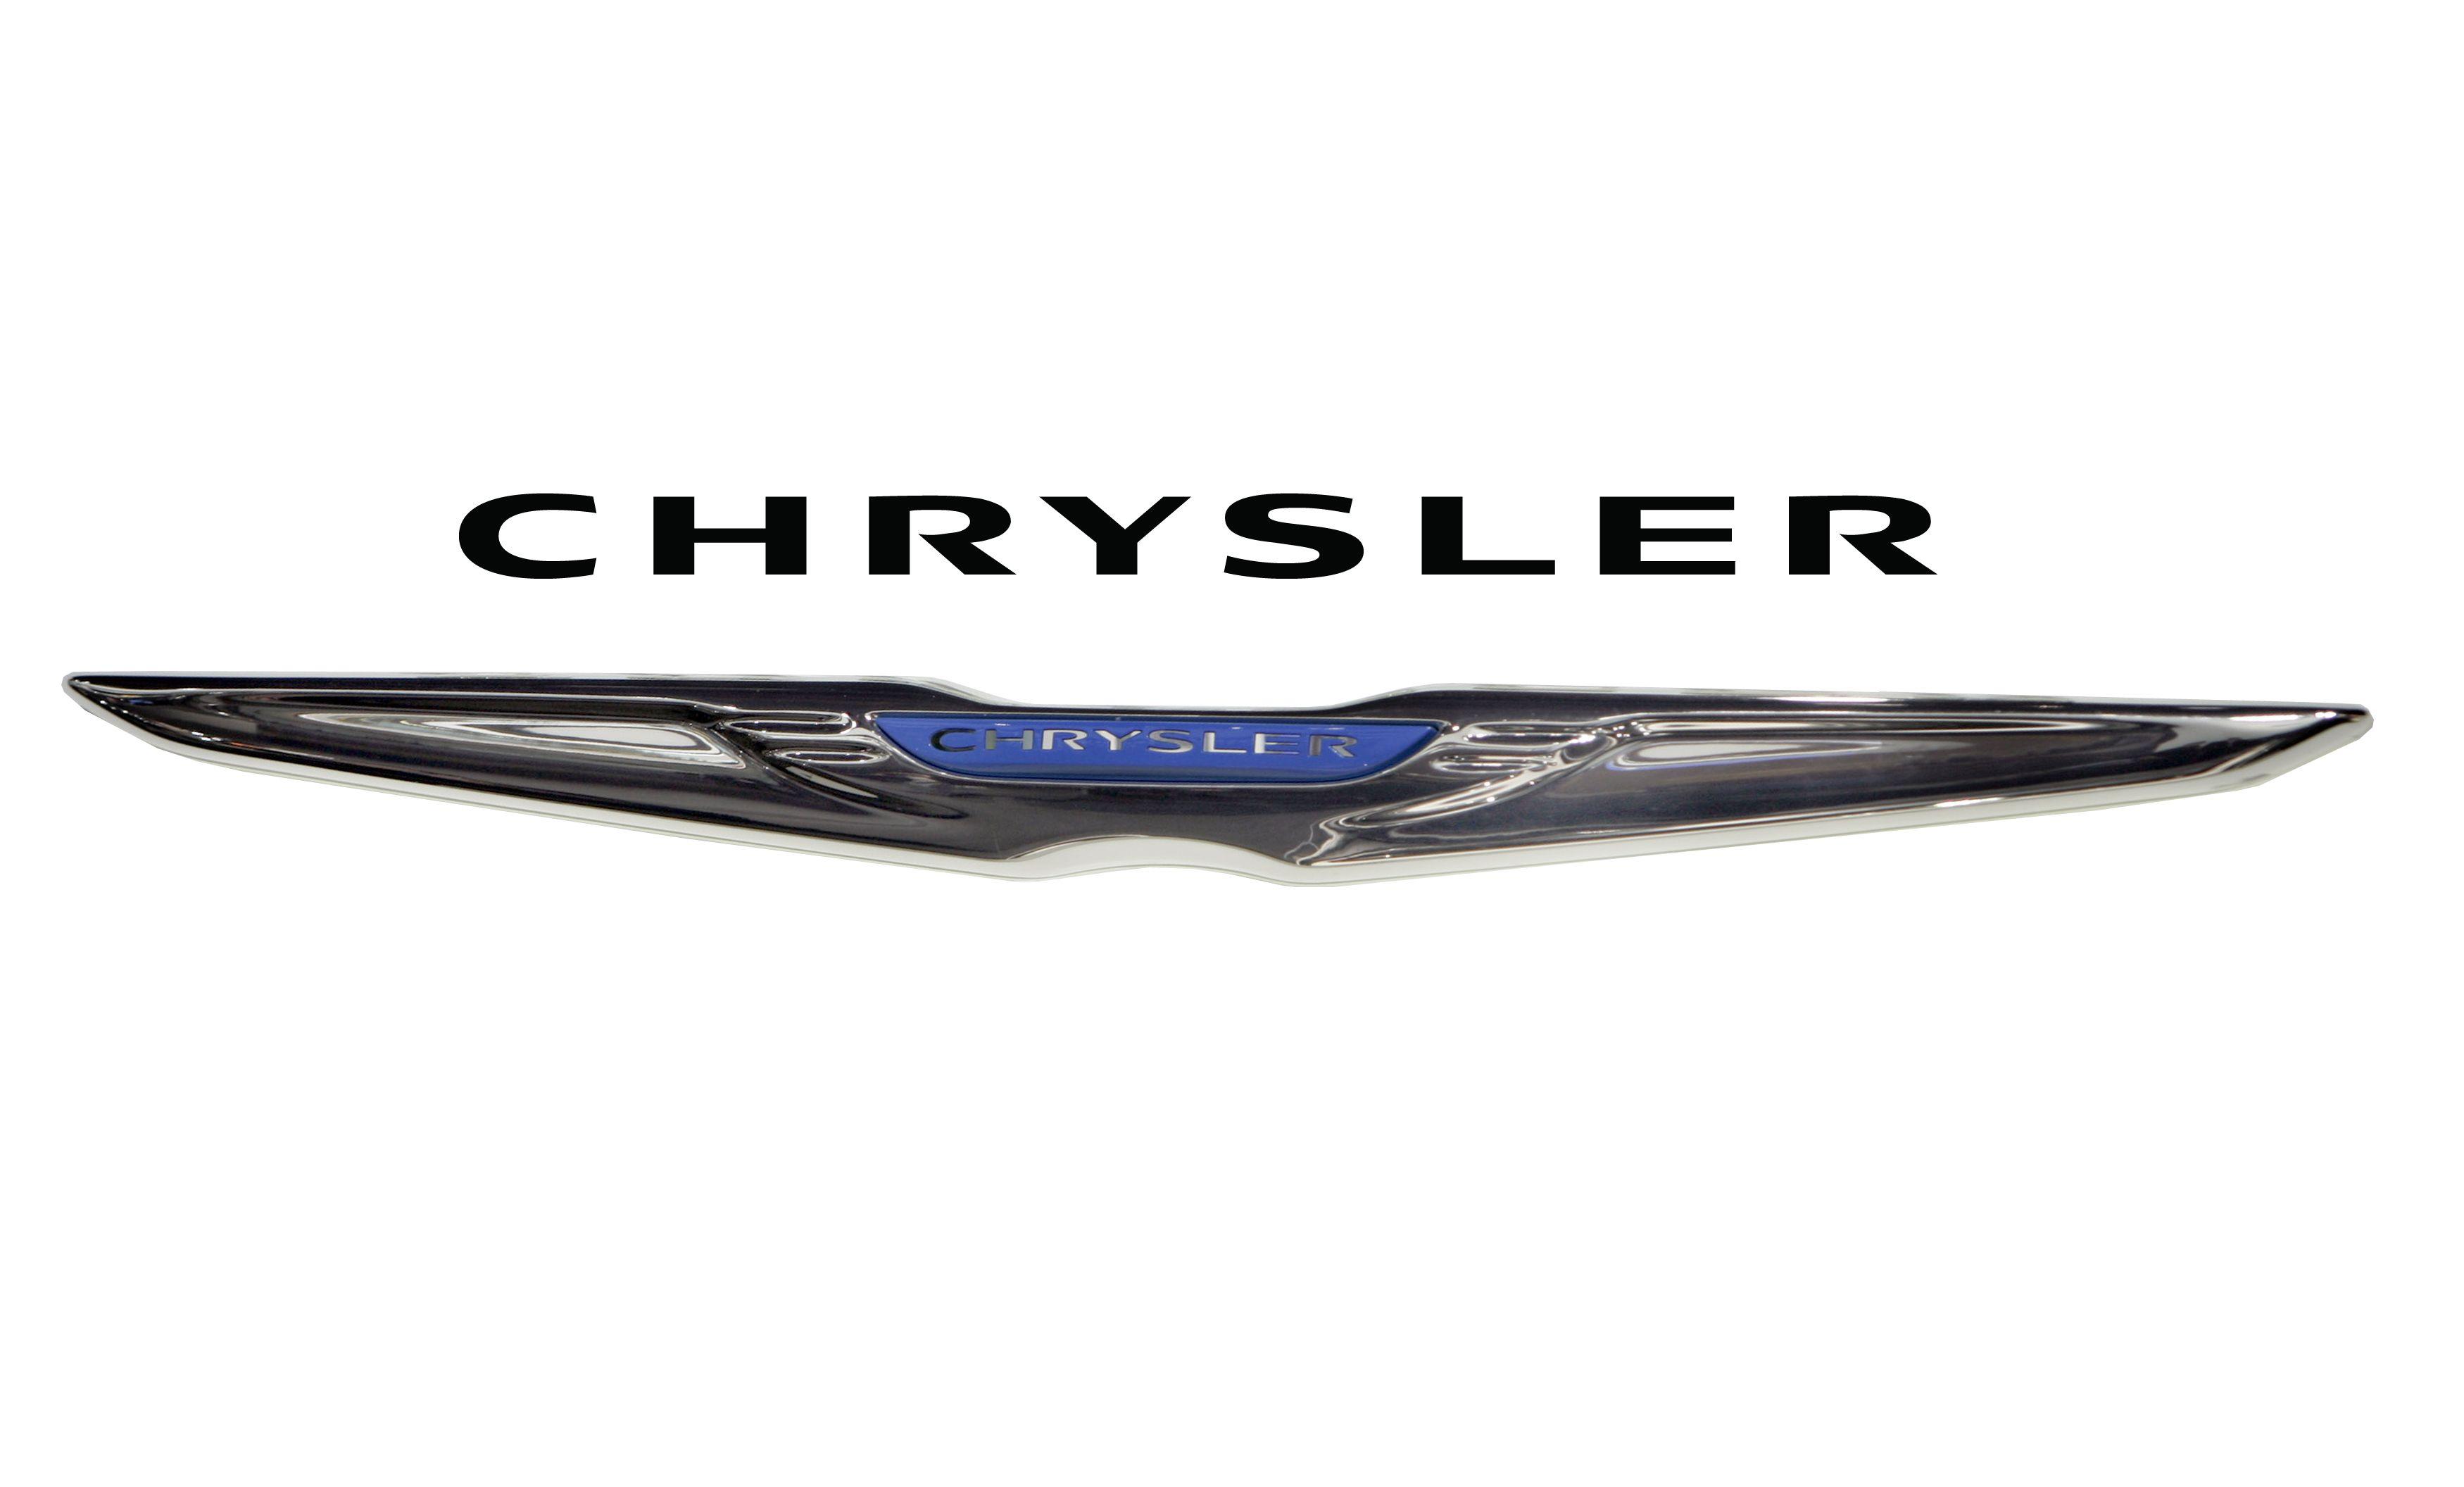 Old Chrysler Logo - Chrysler Logo, Chrysler Car Symbol Meaning and History | Car Brand ...